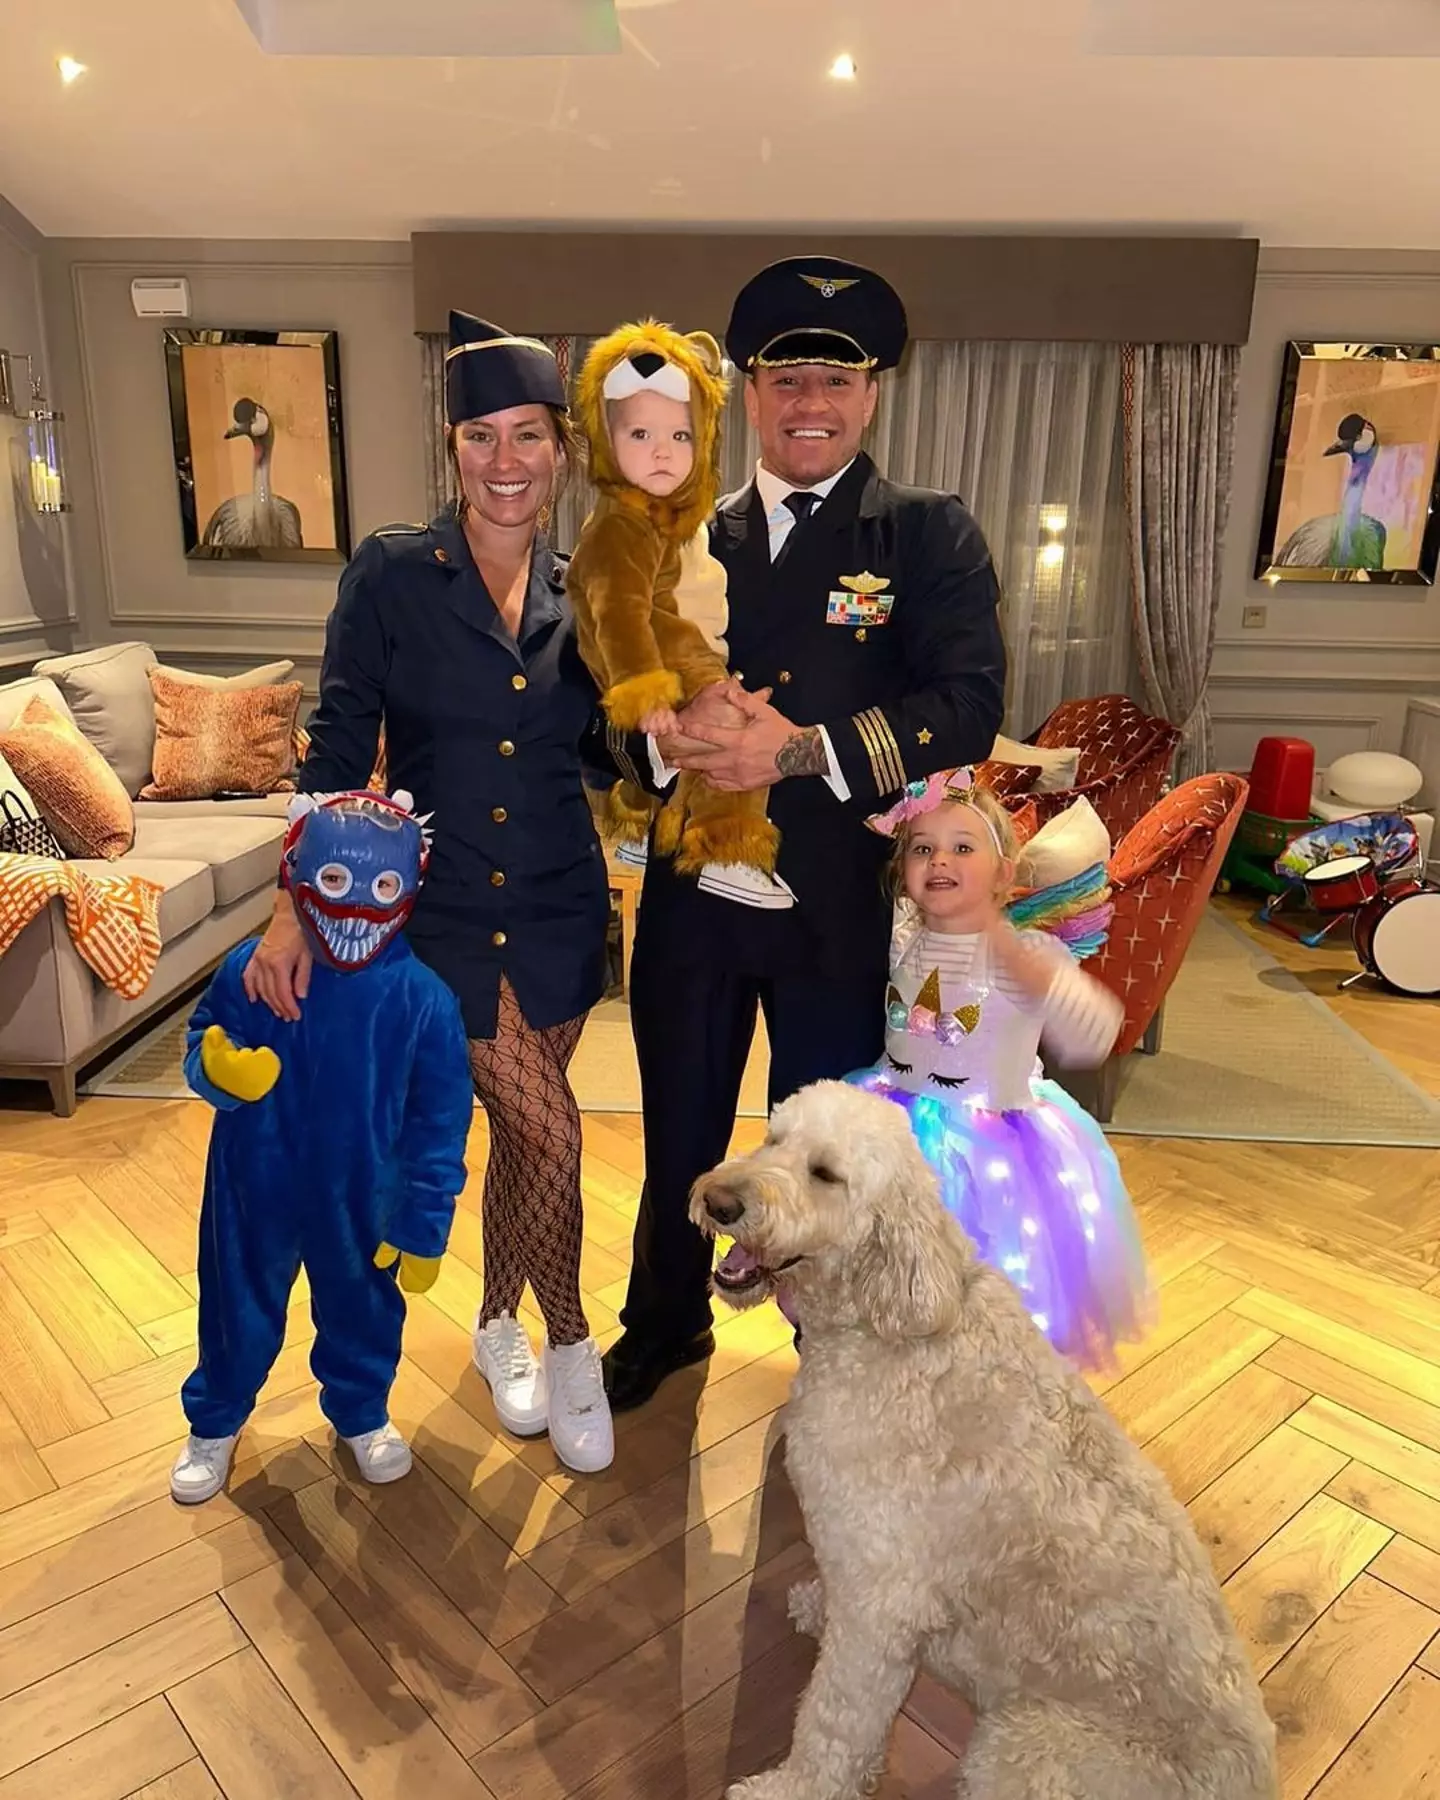 Conor McGregor ditched the beard this Halloween.